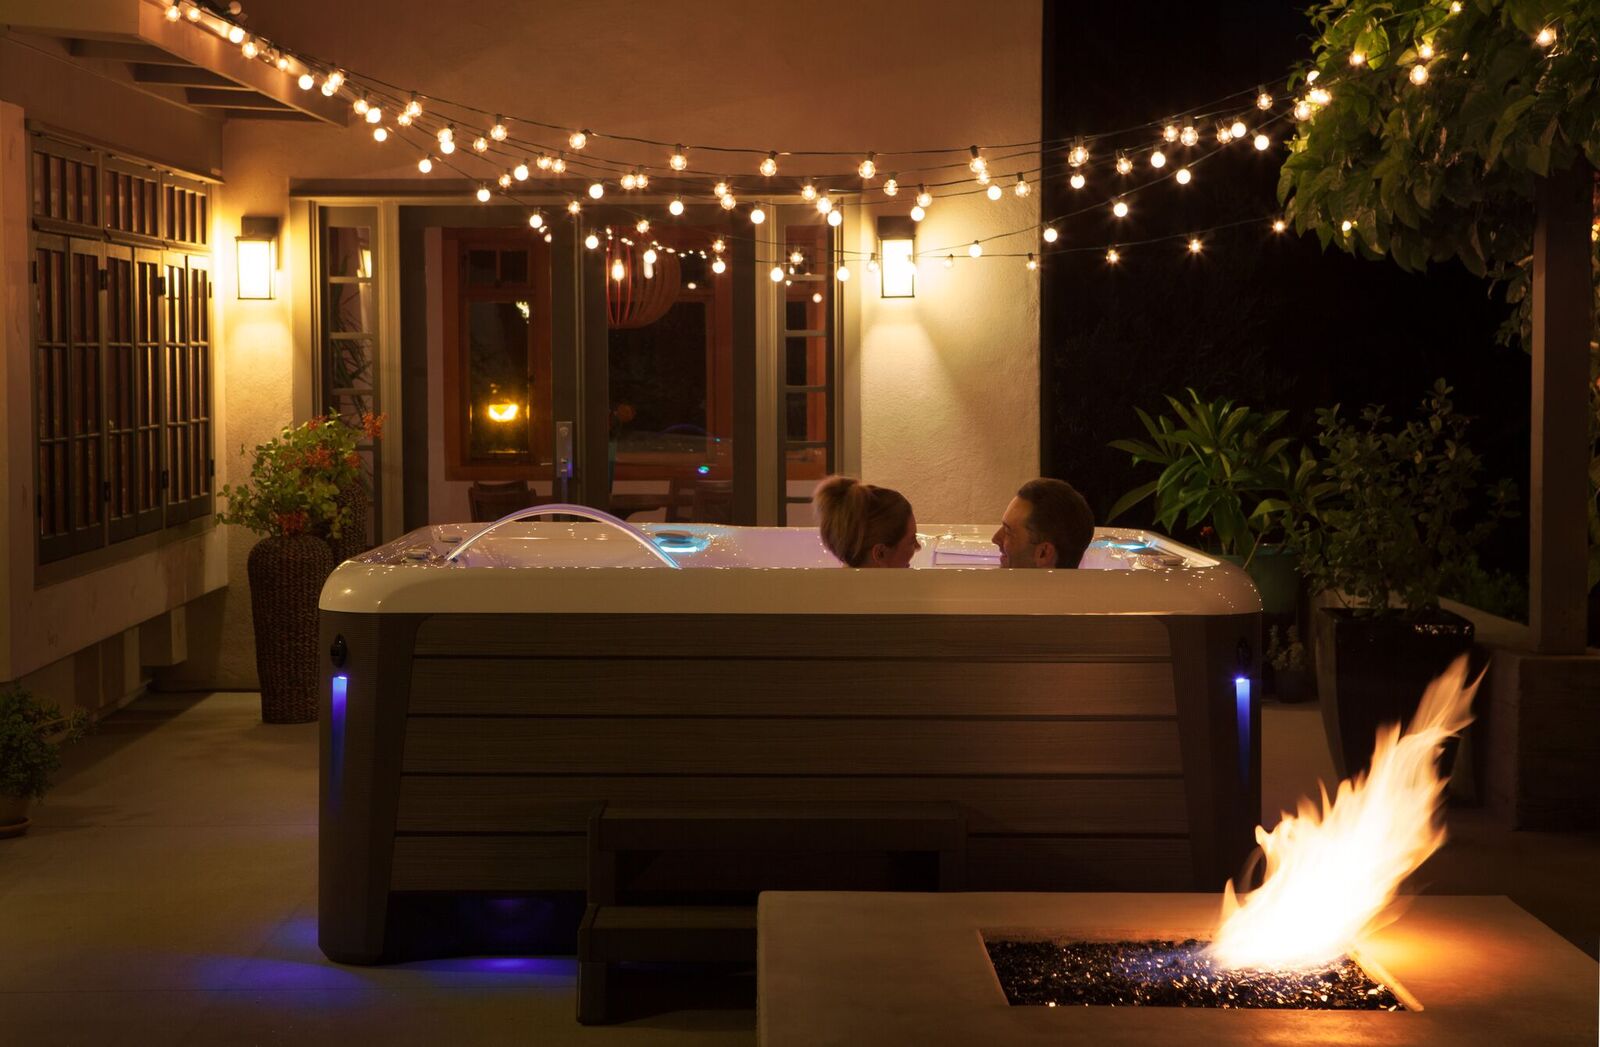 Is Date Night Lacking? A Hot Tub is Your Answer.